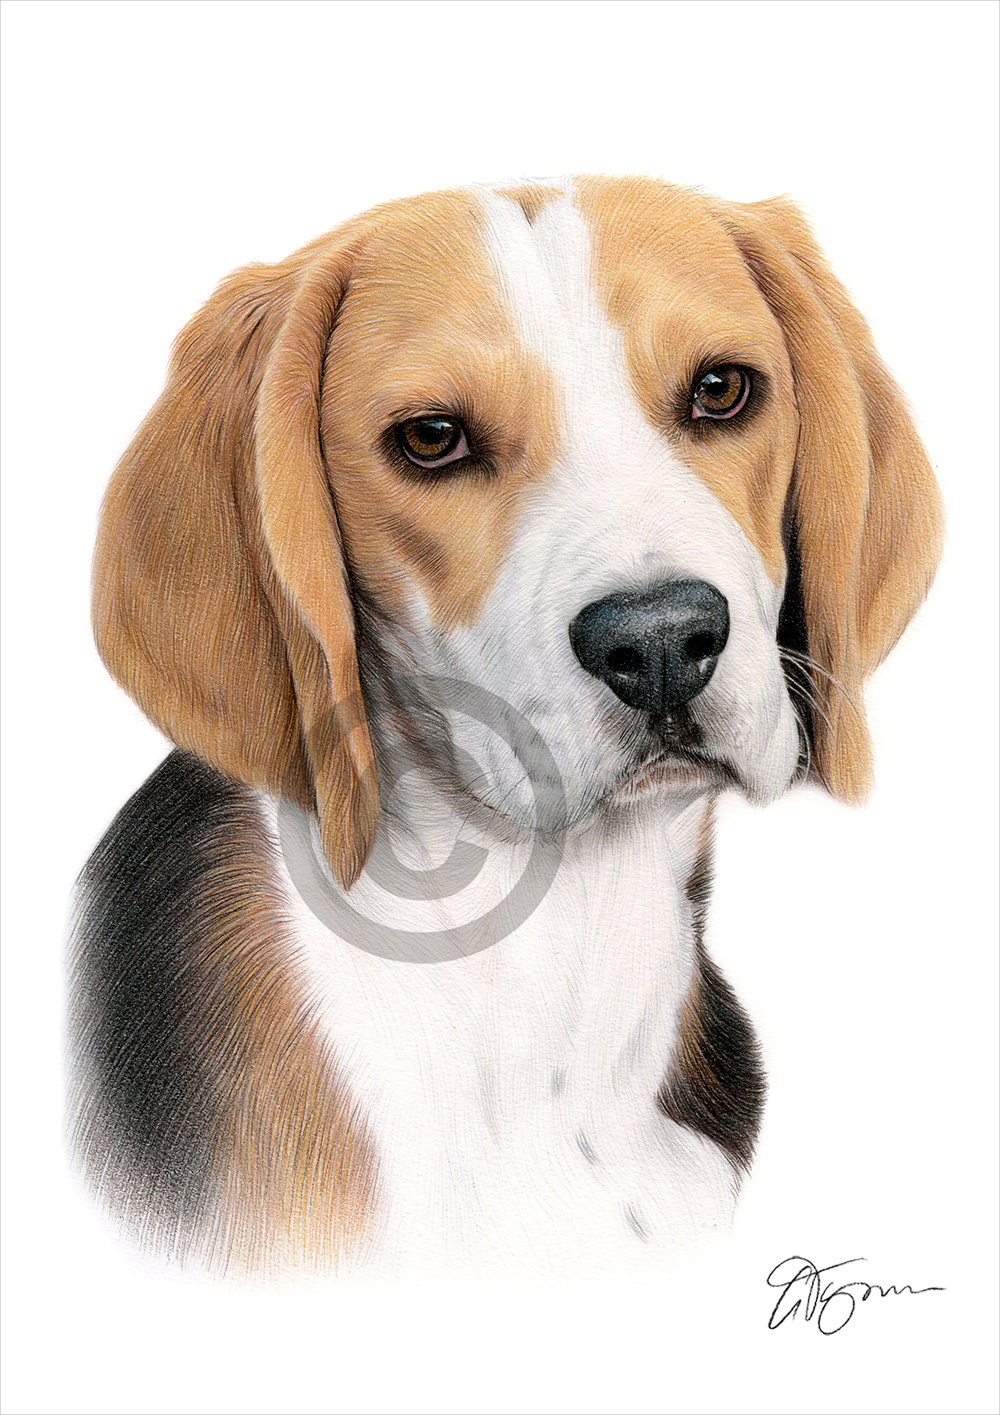 Colour pencil drawing of a beagle by artist Gary Tymon